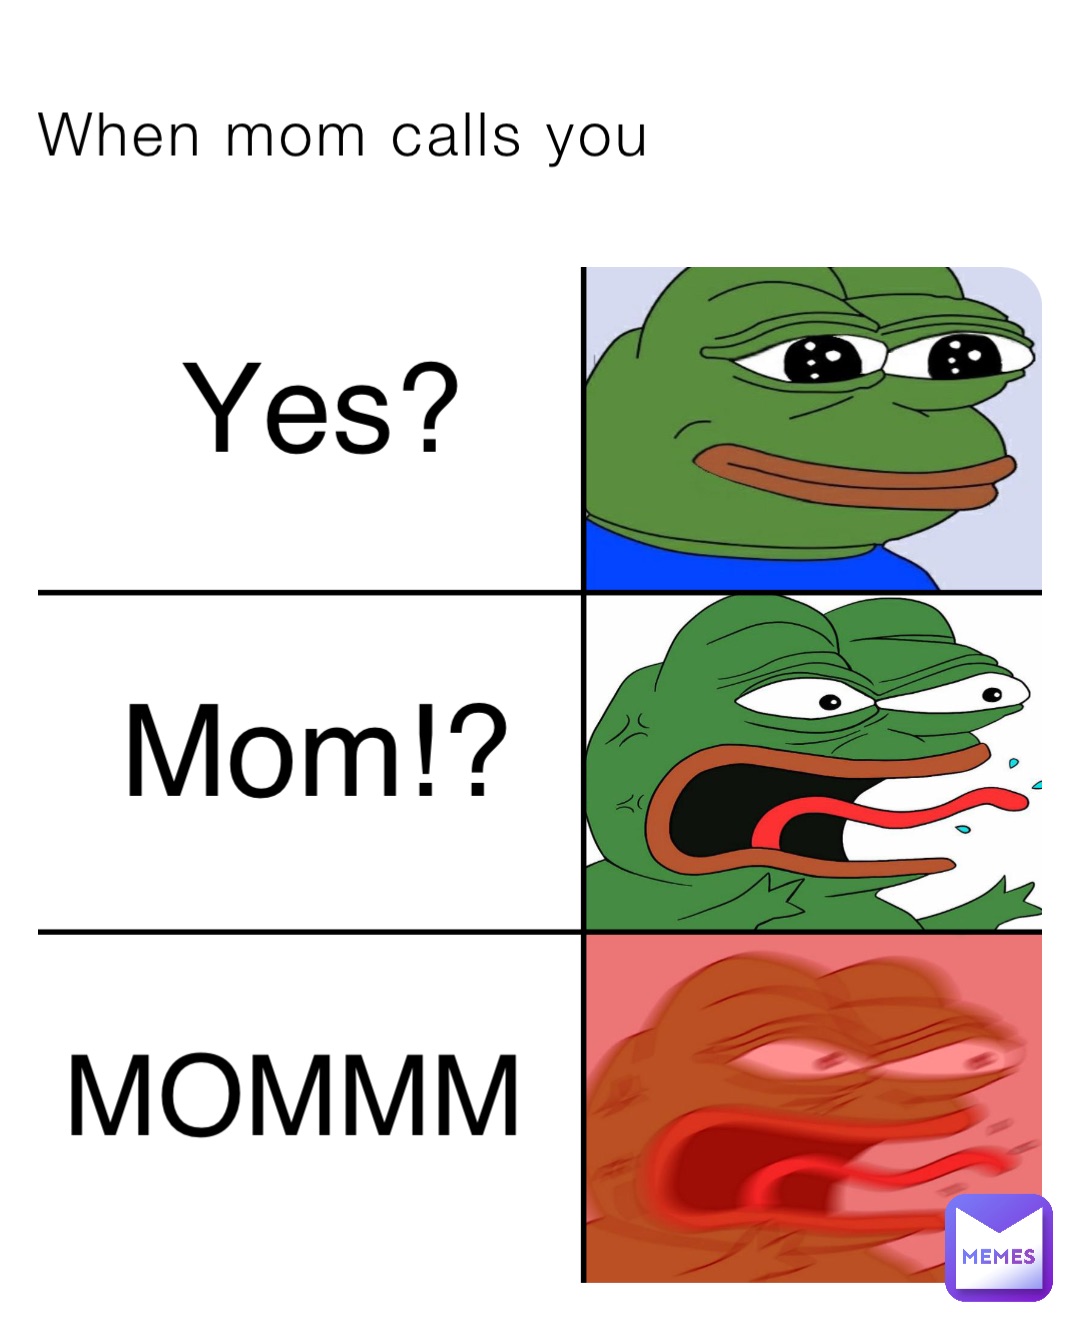 When mom calls you Yes? Mom!? MOMMM